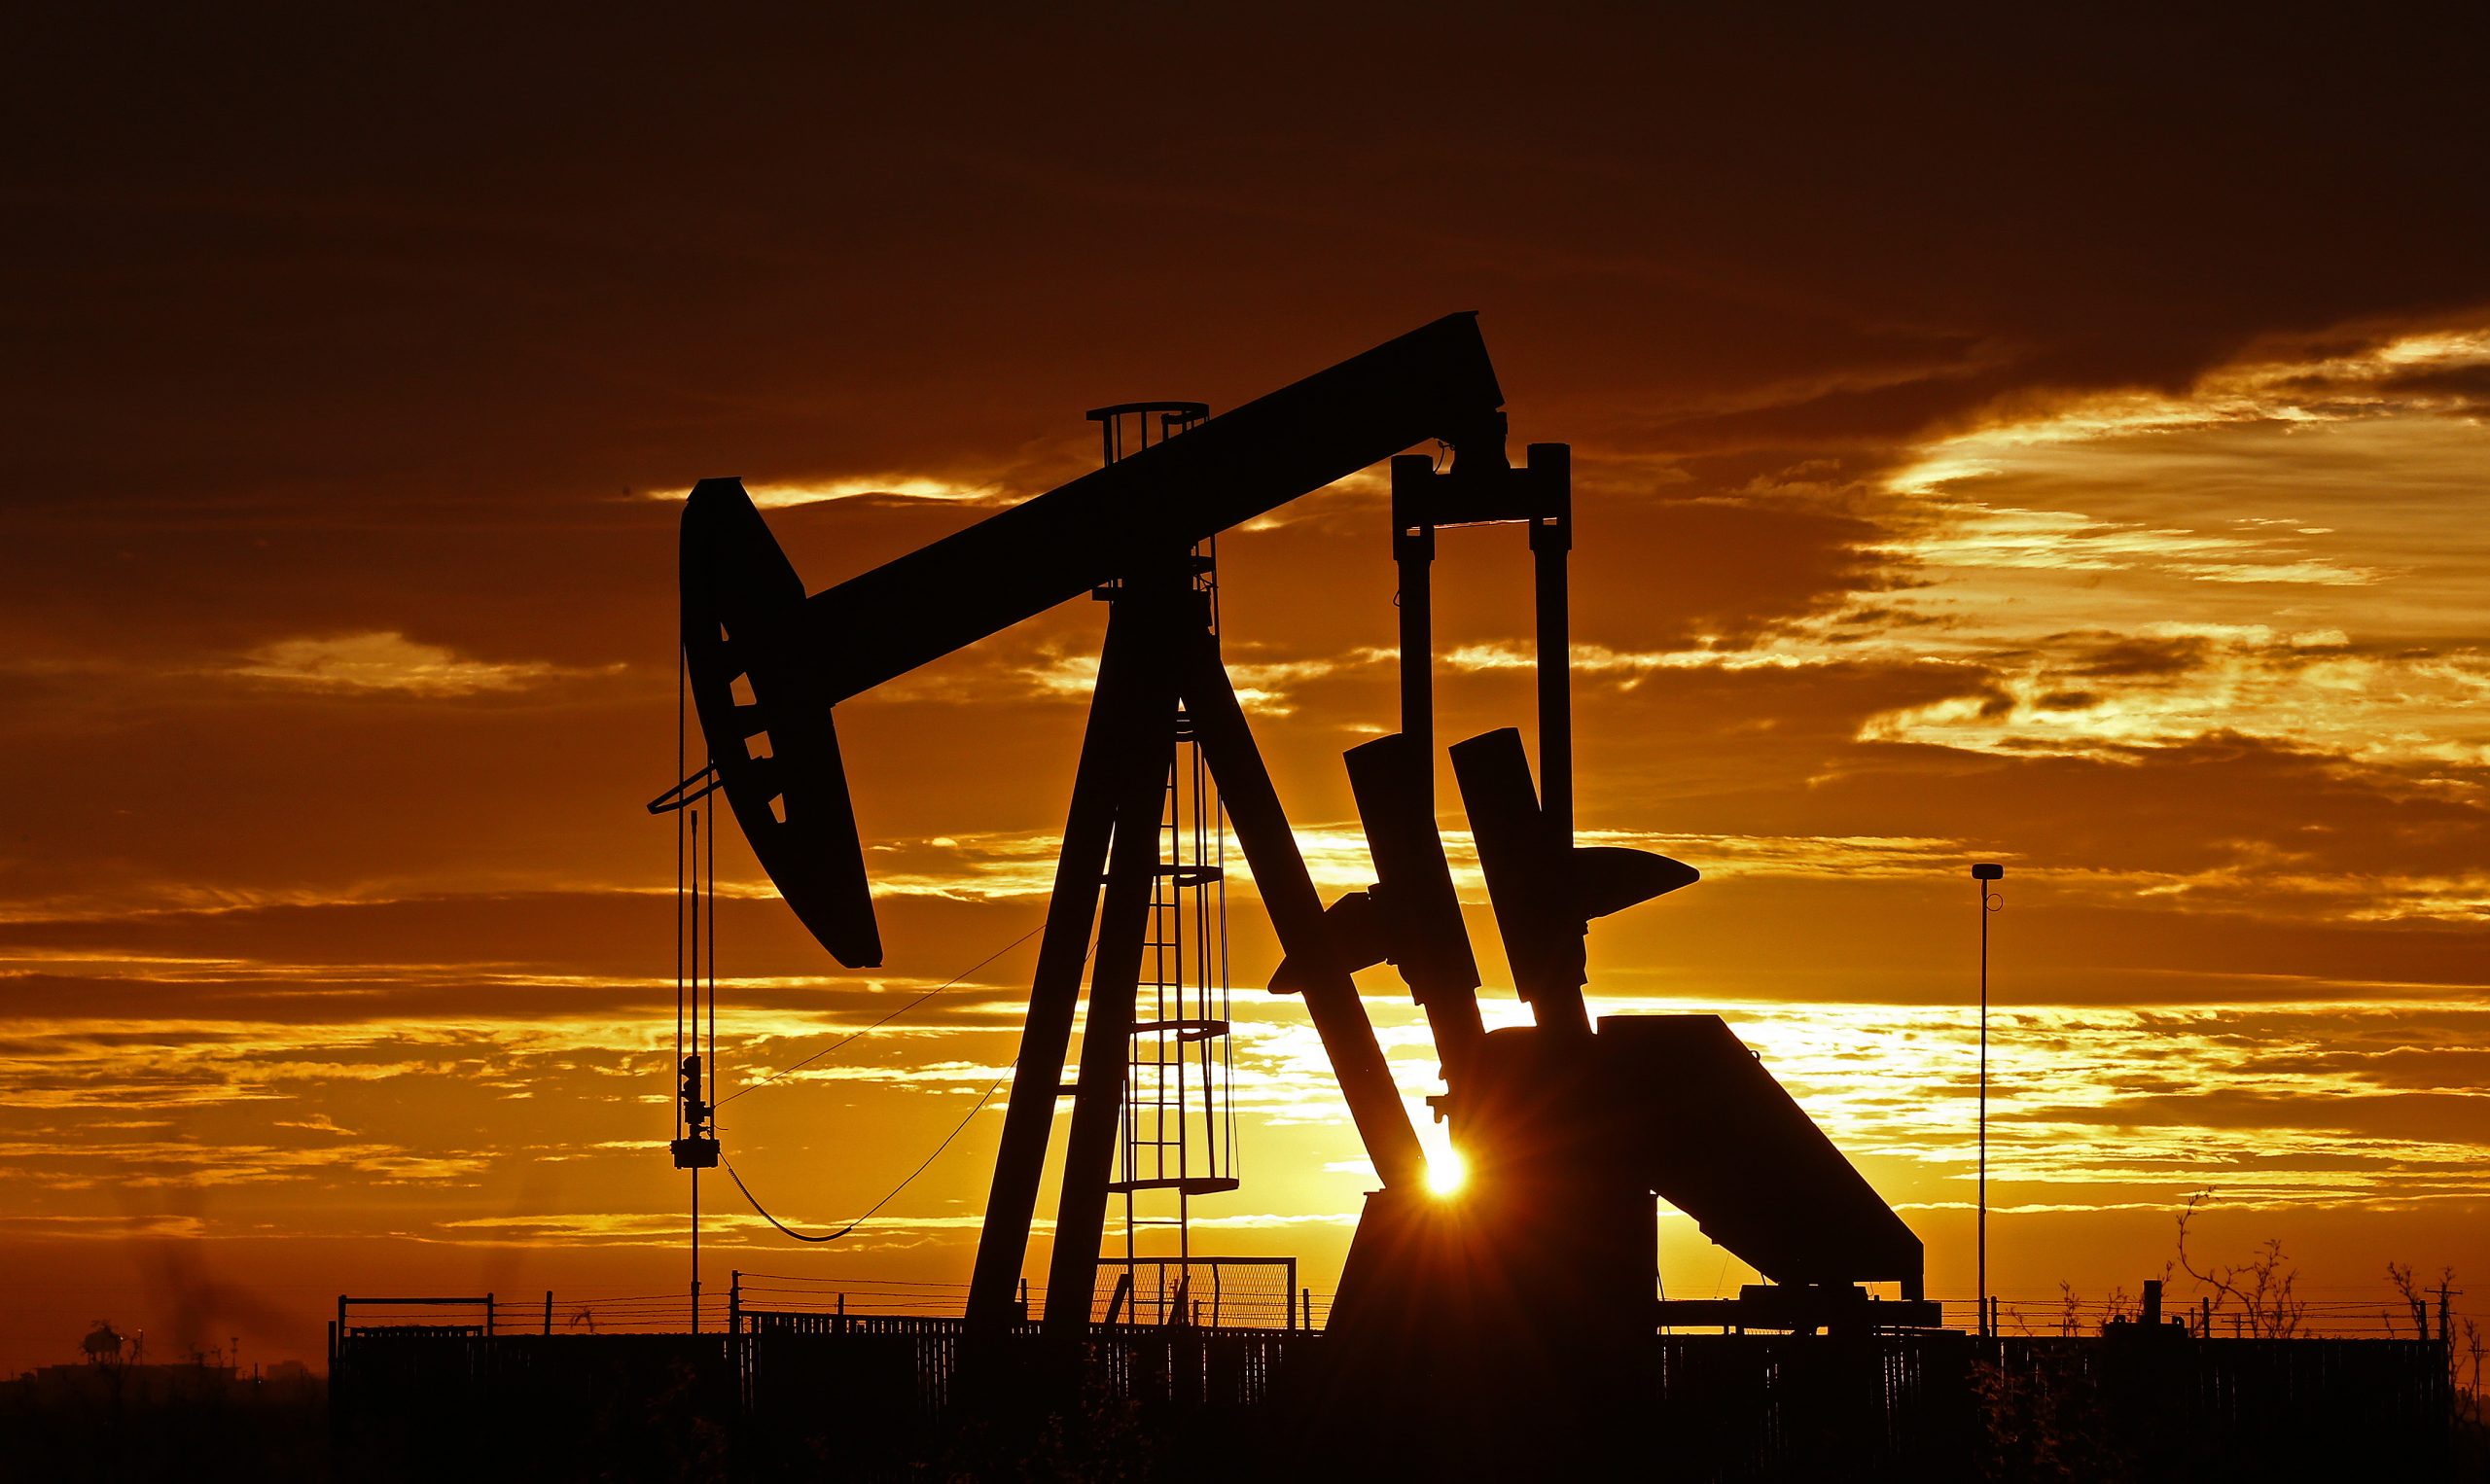 epa08348372 Pump jacks operate in the oil fields near Midland, Texas, USA, at sunrise 07 April 2020. Midland, Texas is a city in western Texas, part of the Permian Basin area. Low oil prices are reportedly causing also the gas prices to drop dramatically.  EPA/LARRY W. SMITH